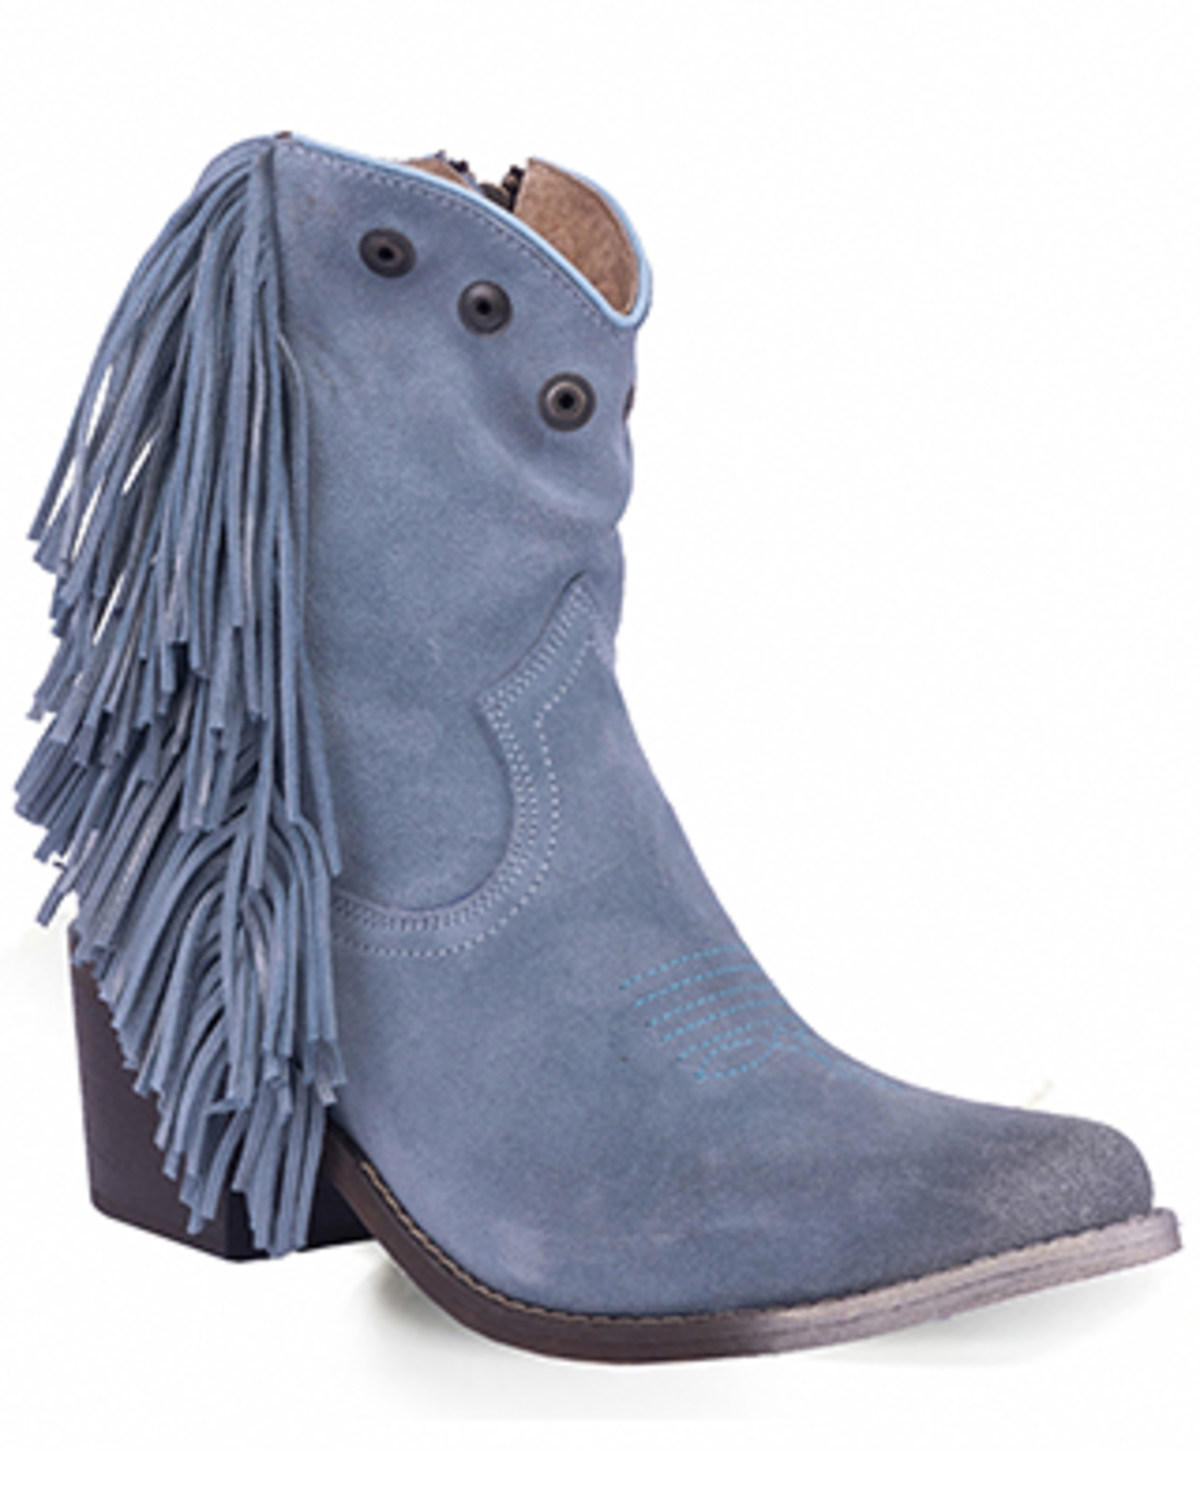 Circle G Women's Studded Suede Fringe Ankle Boots